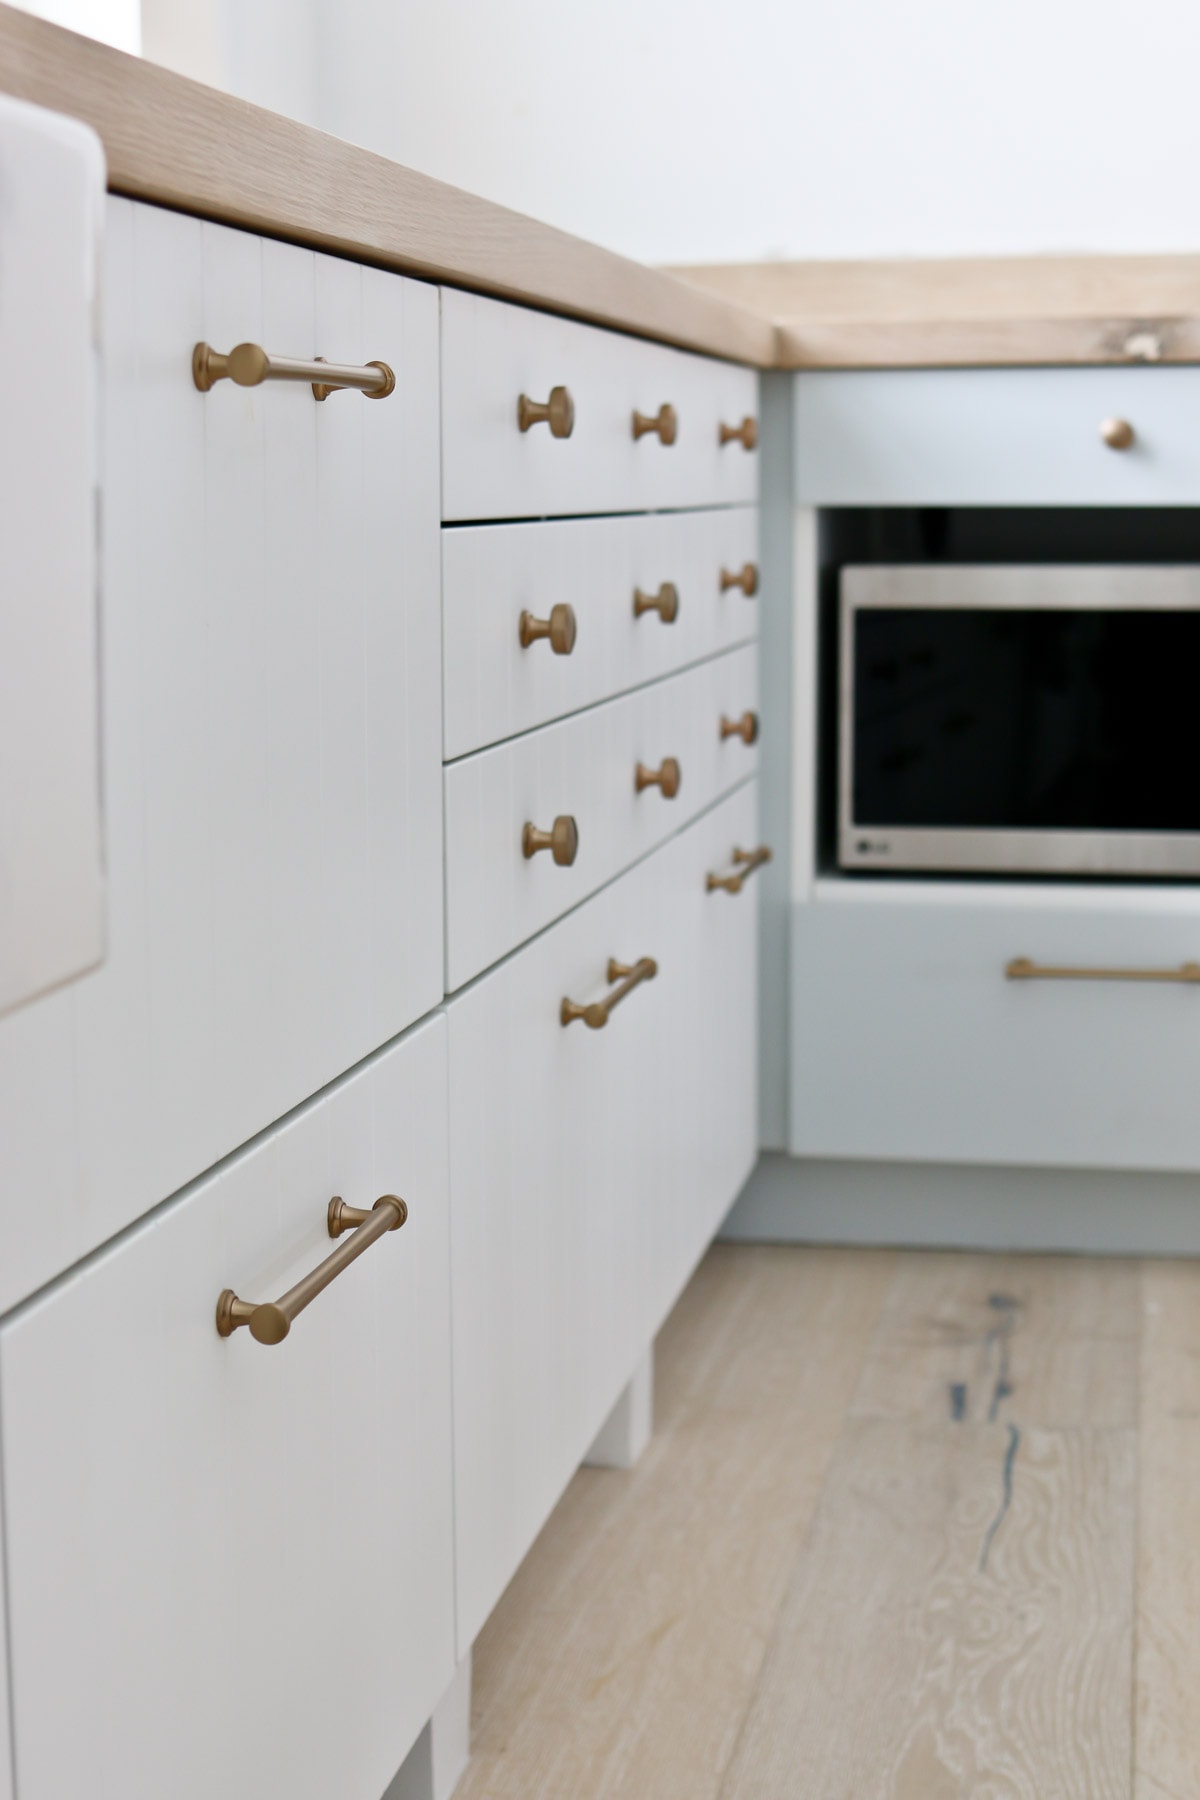 Choosing Hardware For Your Kitchen My, How To Pick New Hardware For Kitchen Cabinets